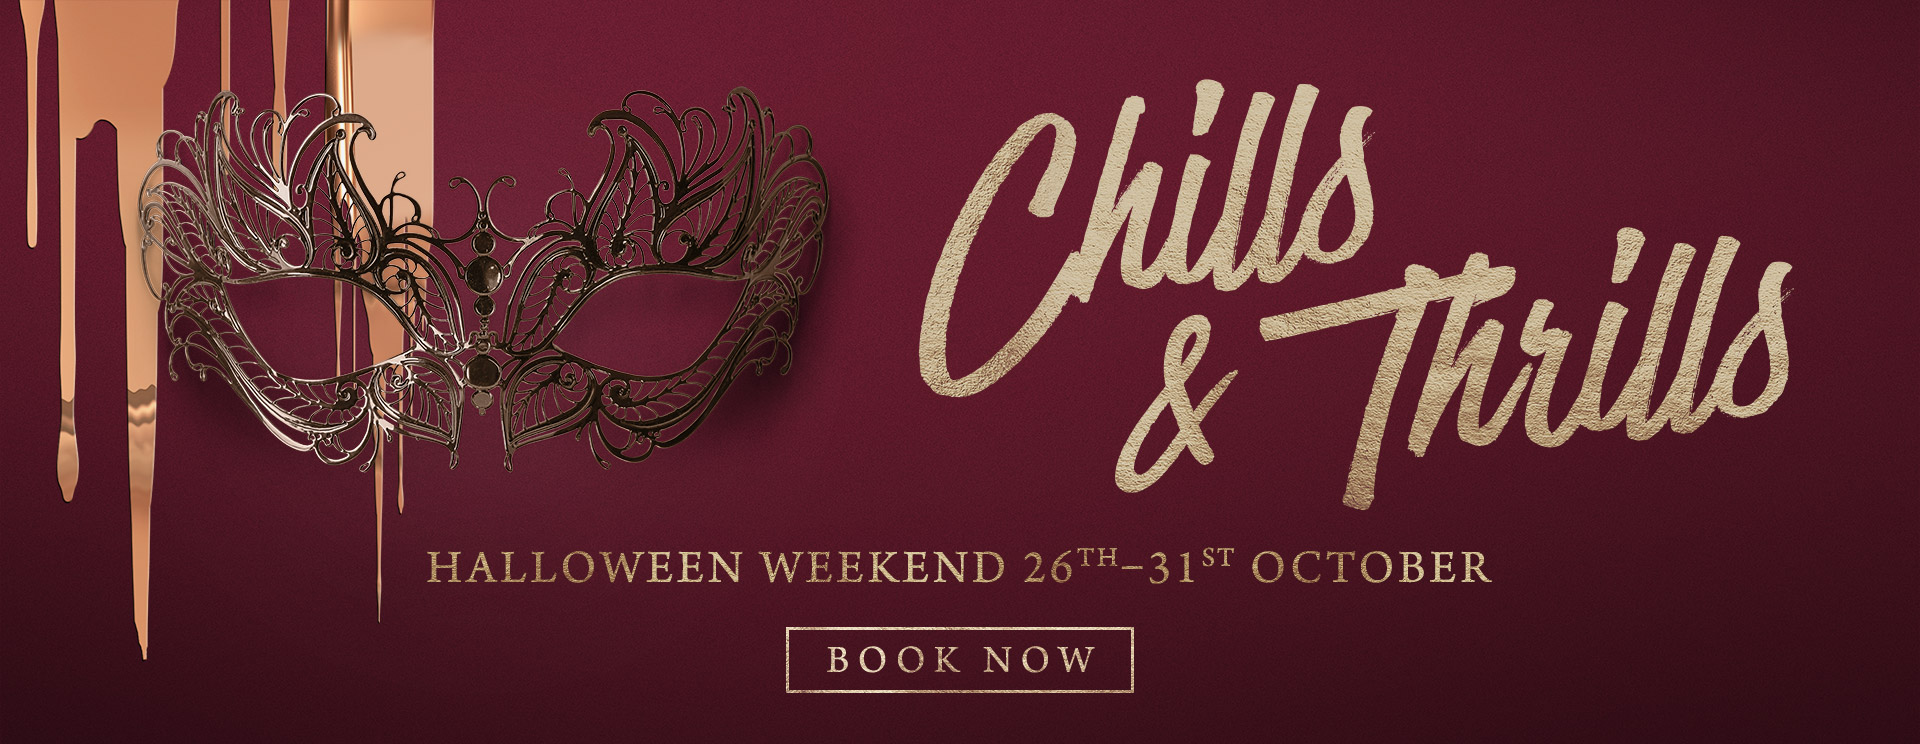 Chills & Thrills this Halloween at The George & Dragon